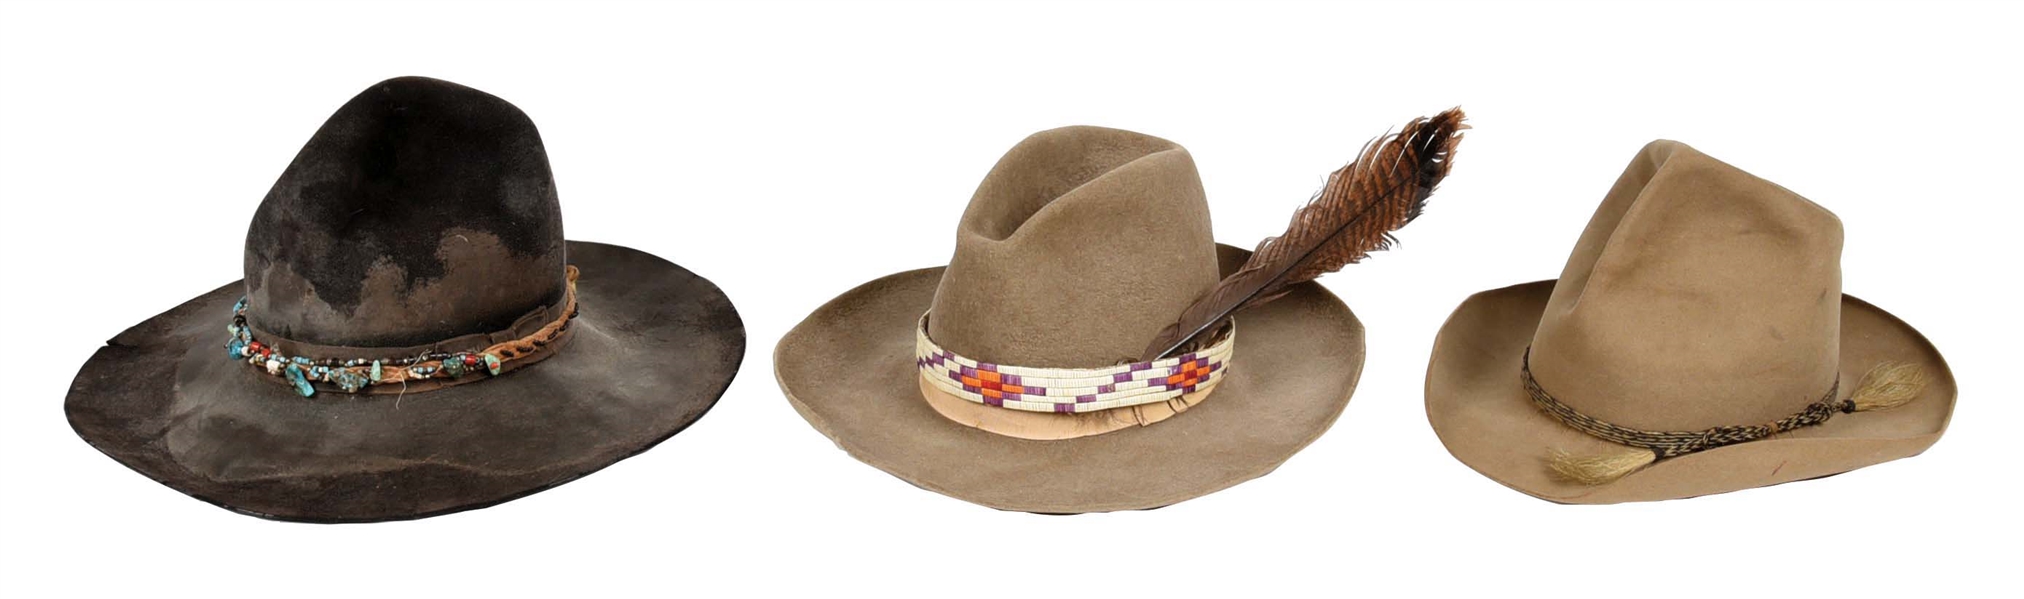 LOT OF 3: COWBOY HATS WITH QUILLED, BEADED & HORSEHAIR BANDS. 